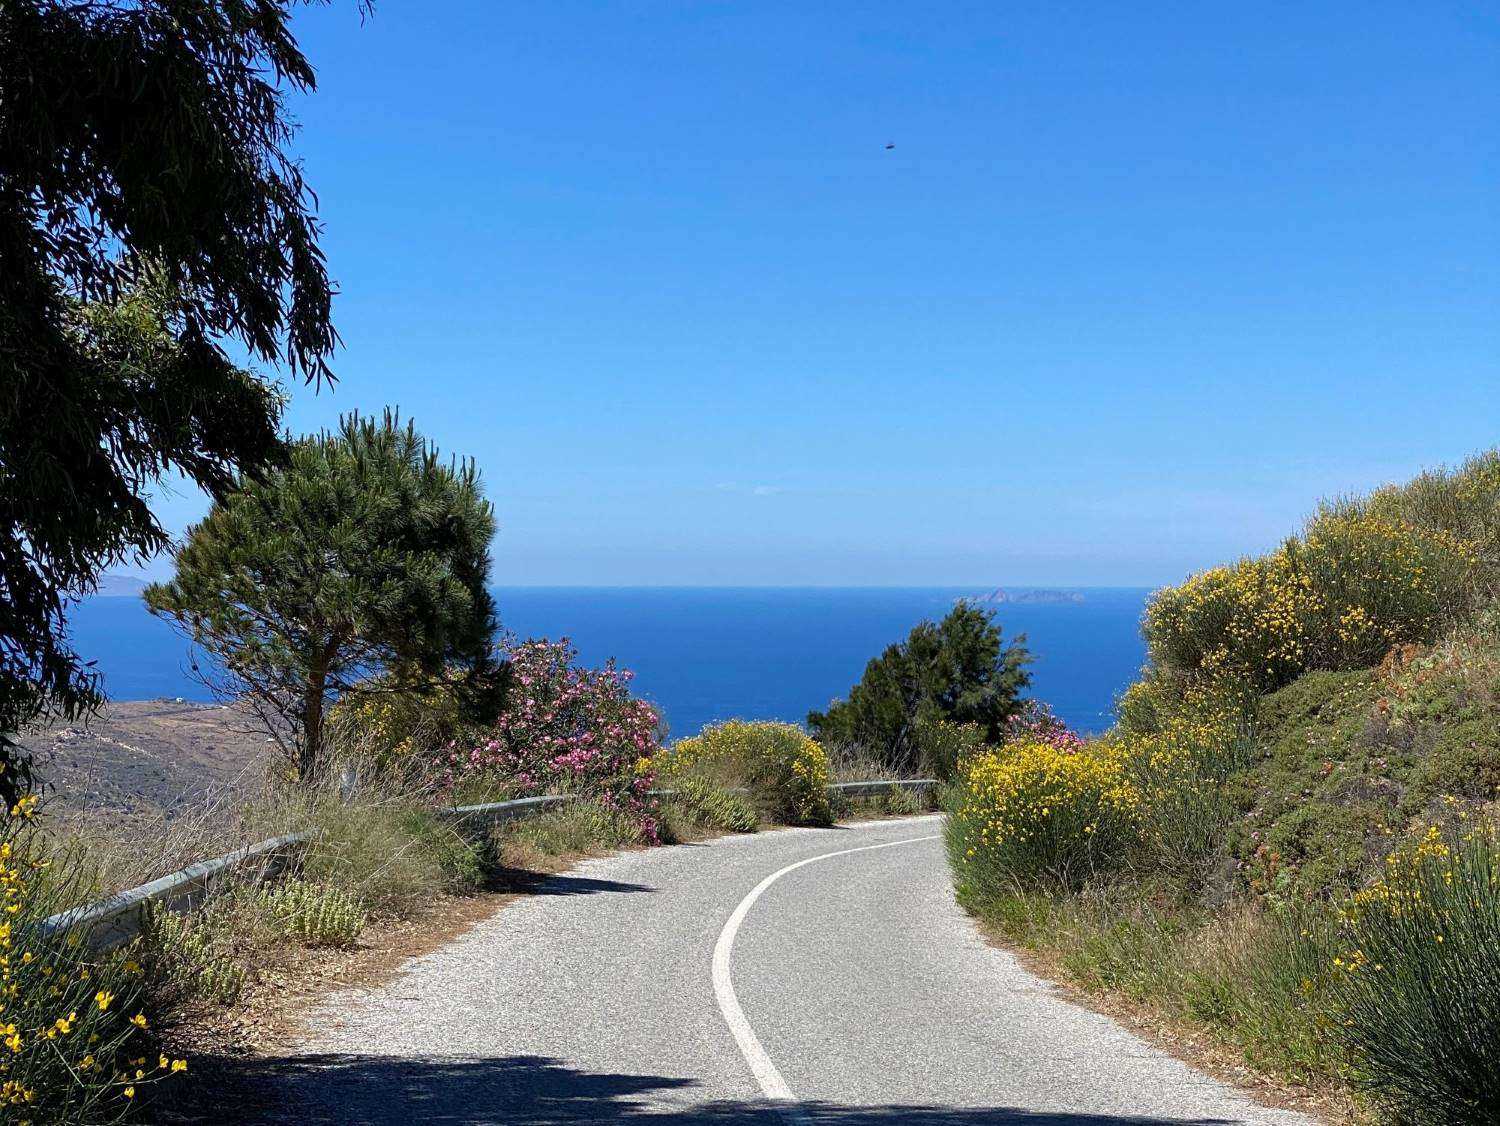 A road curves round a corner with view of shrubs on the roadside and the sea beyond | Driving in Greece - tips for driving the islands | greekislandbucketlist.com